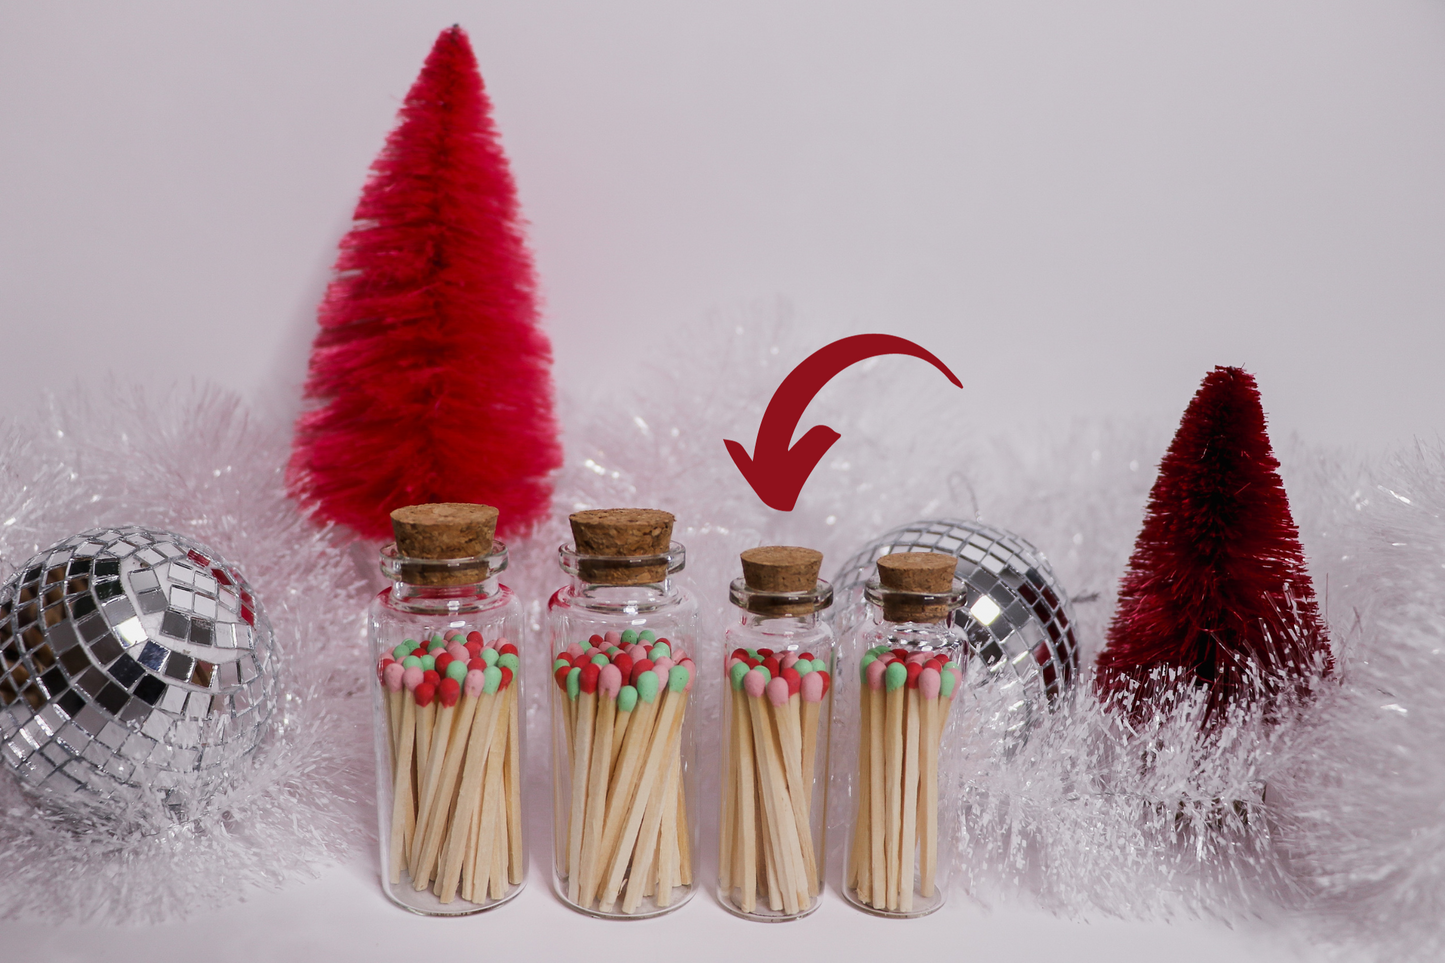 Kitschy Christmas Matches in Small Corked Vial